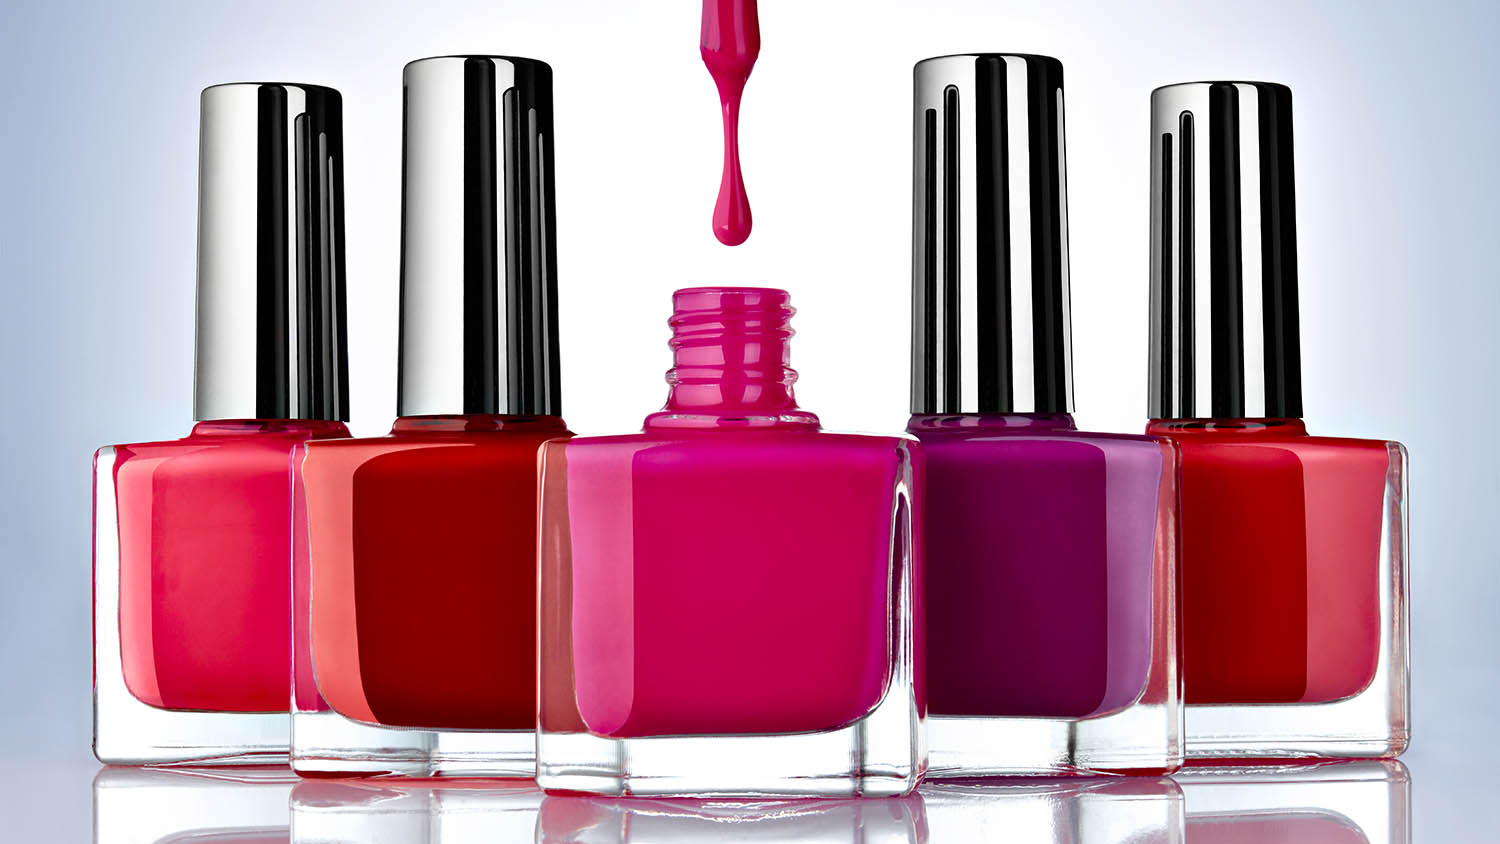 Red Nail Art Gallery - Top 10 Red Nail Polish Brands for Long-Lasting Color - wide 8